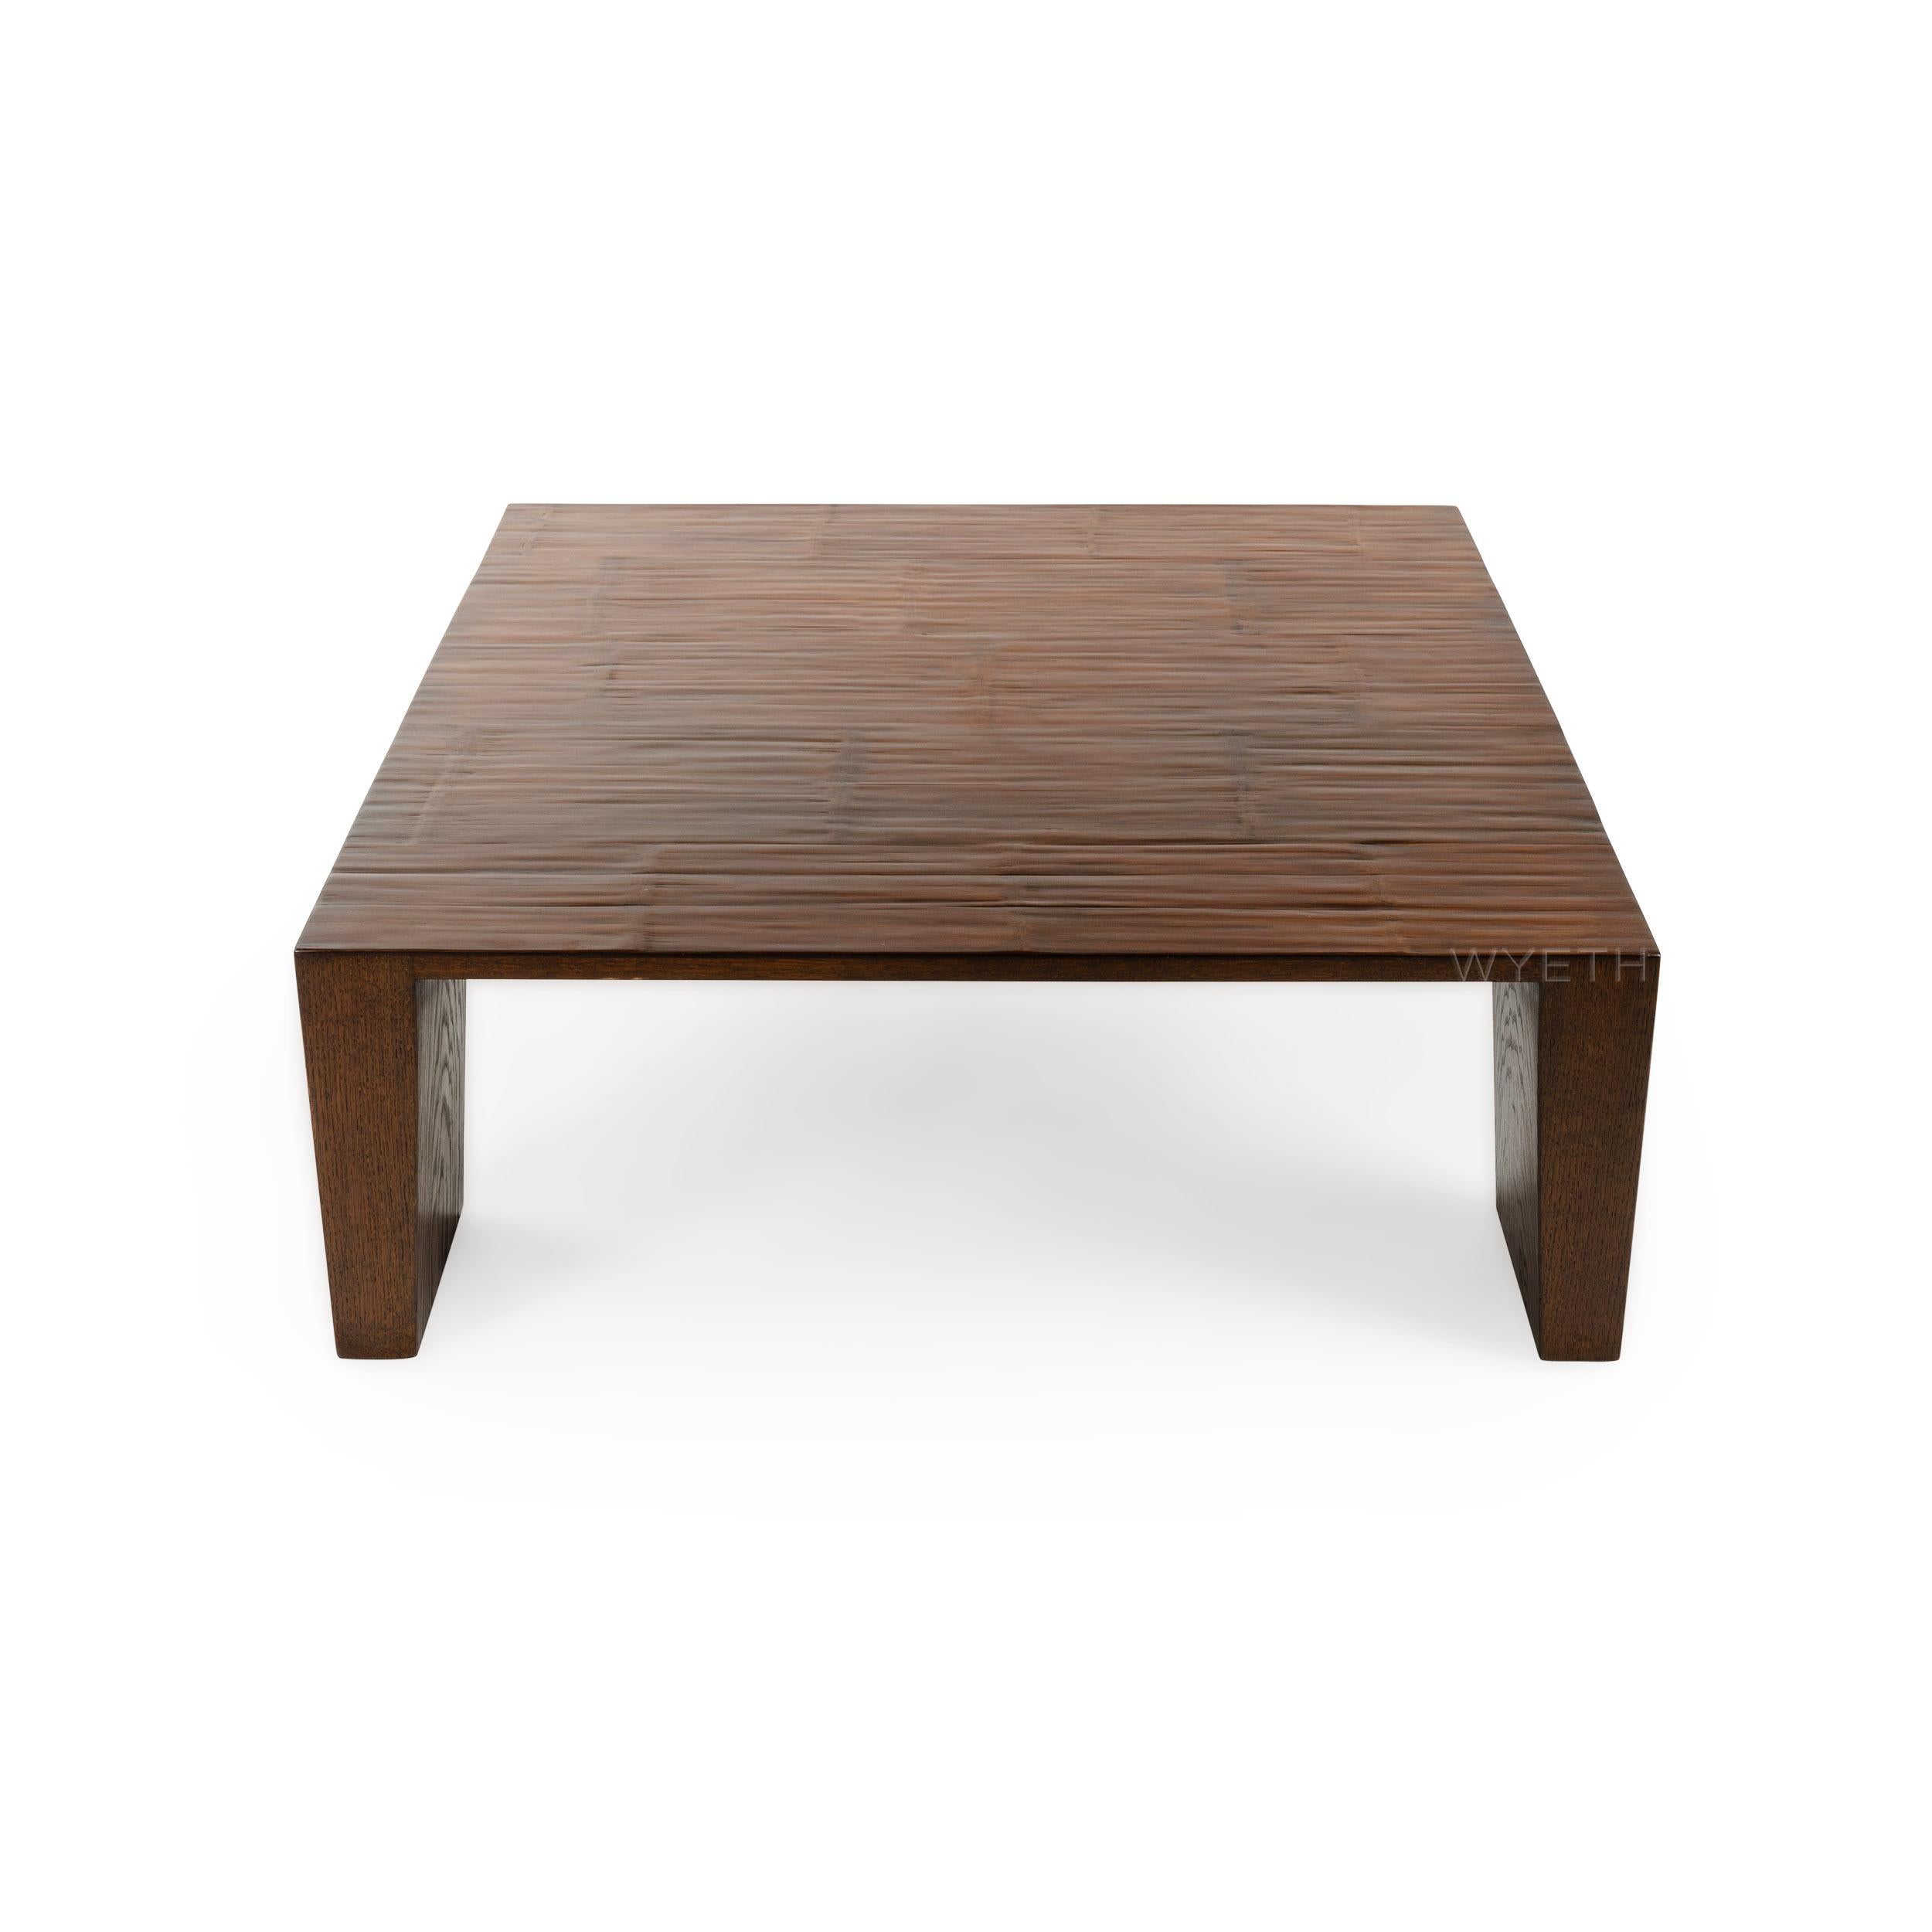 A well-crafted square low table with a split bamboo top and end legs.